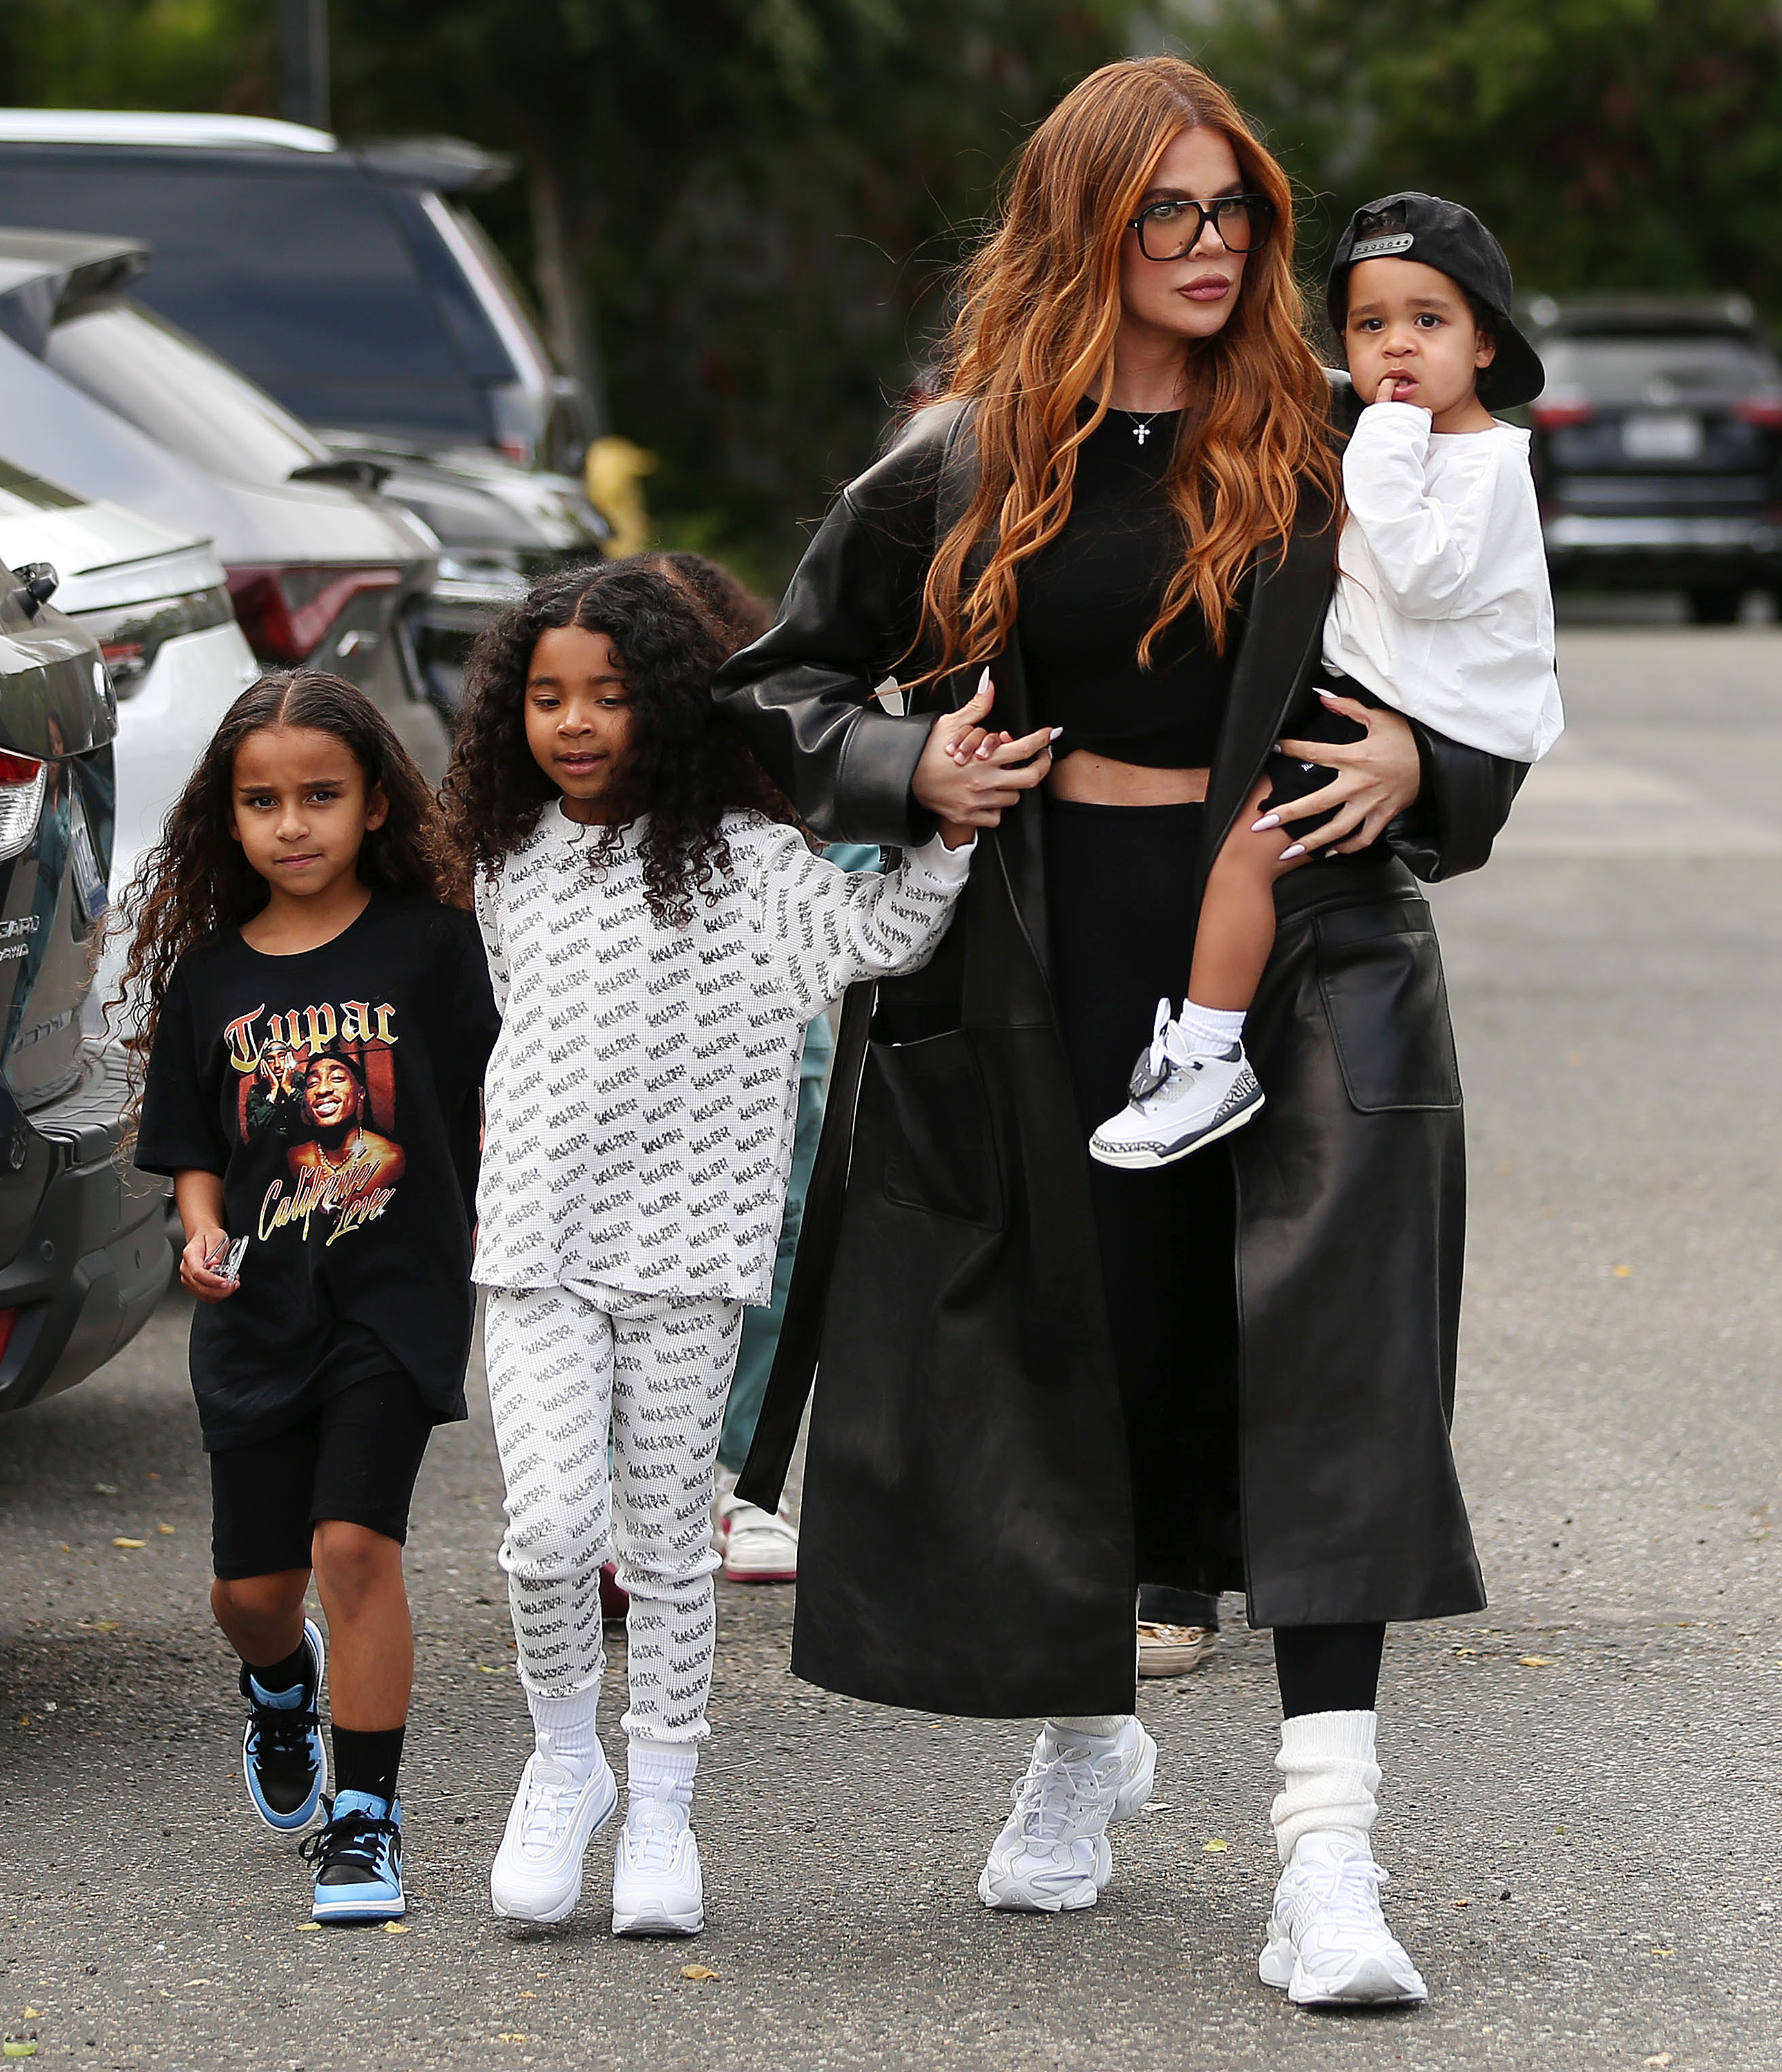 Khloe sported a new red look